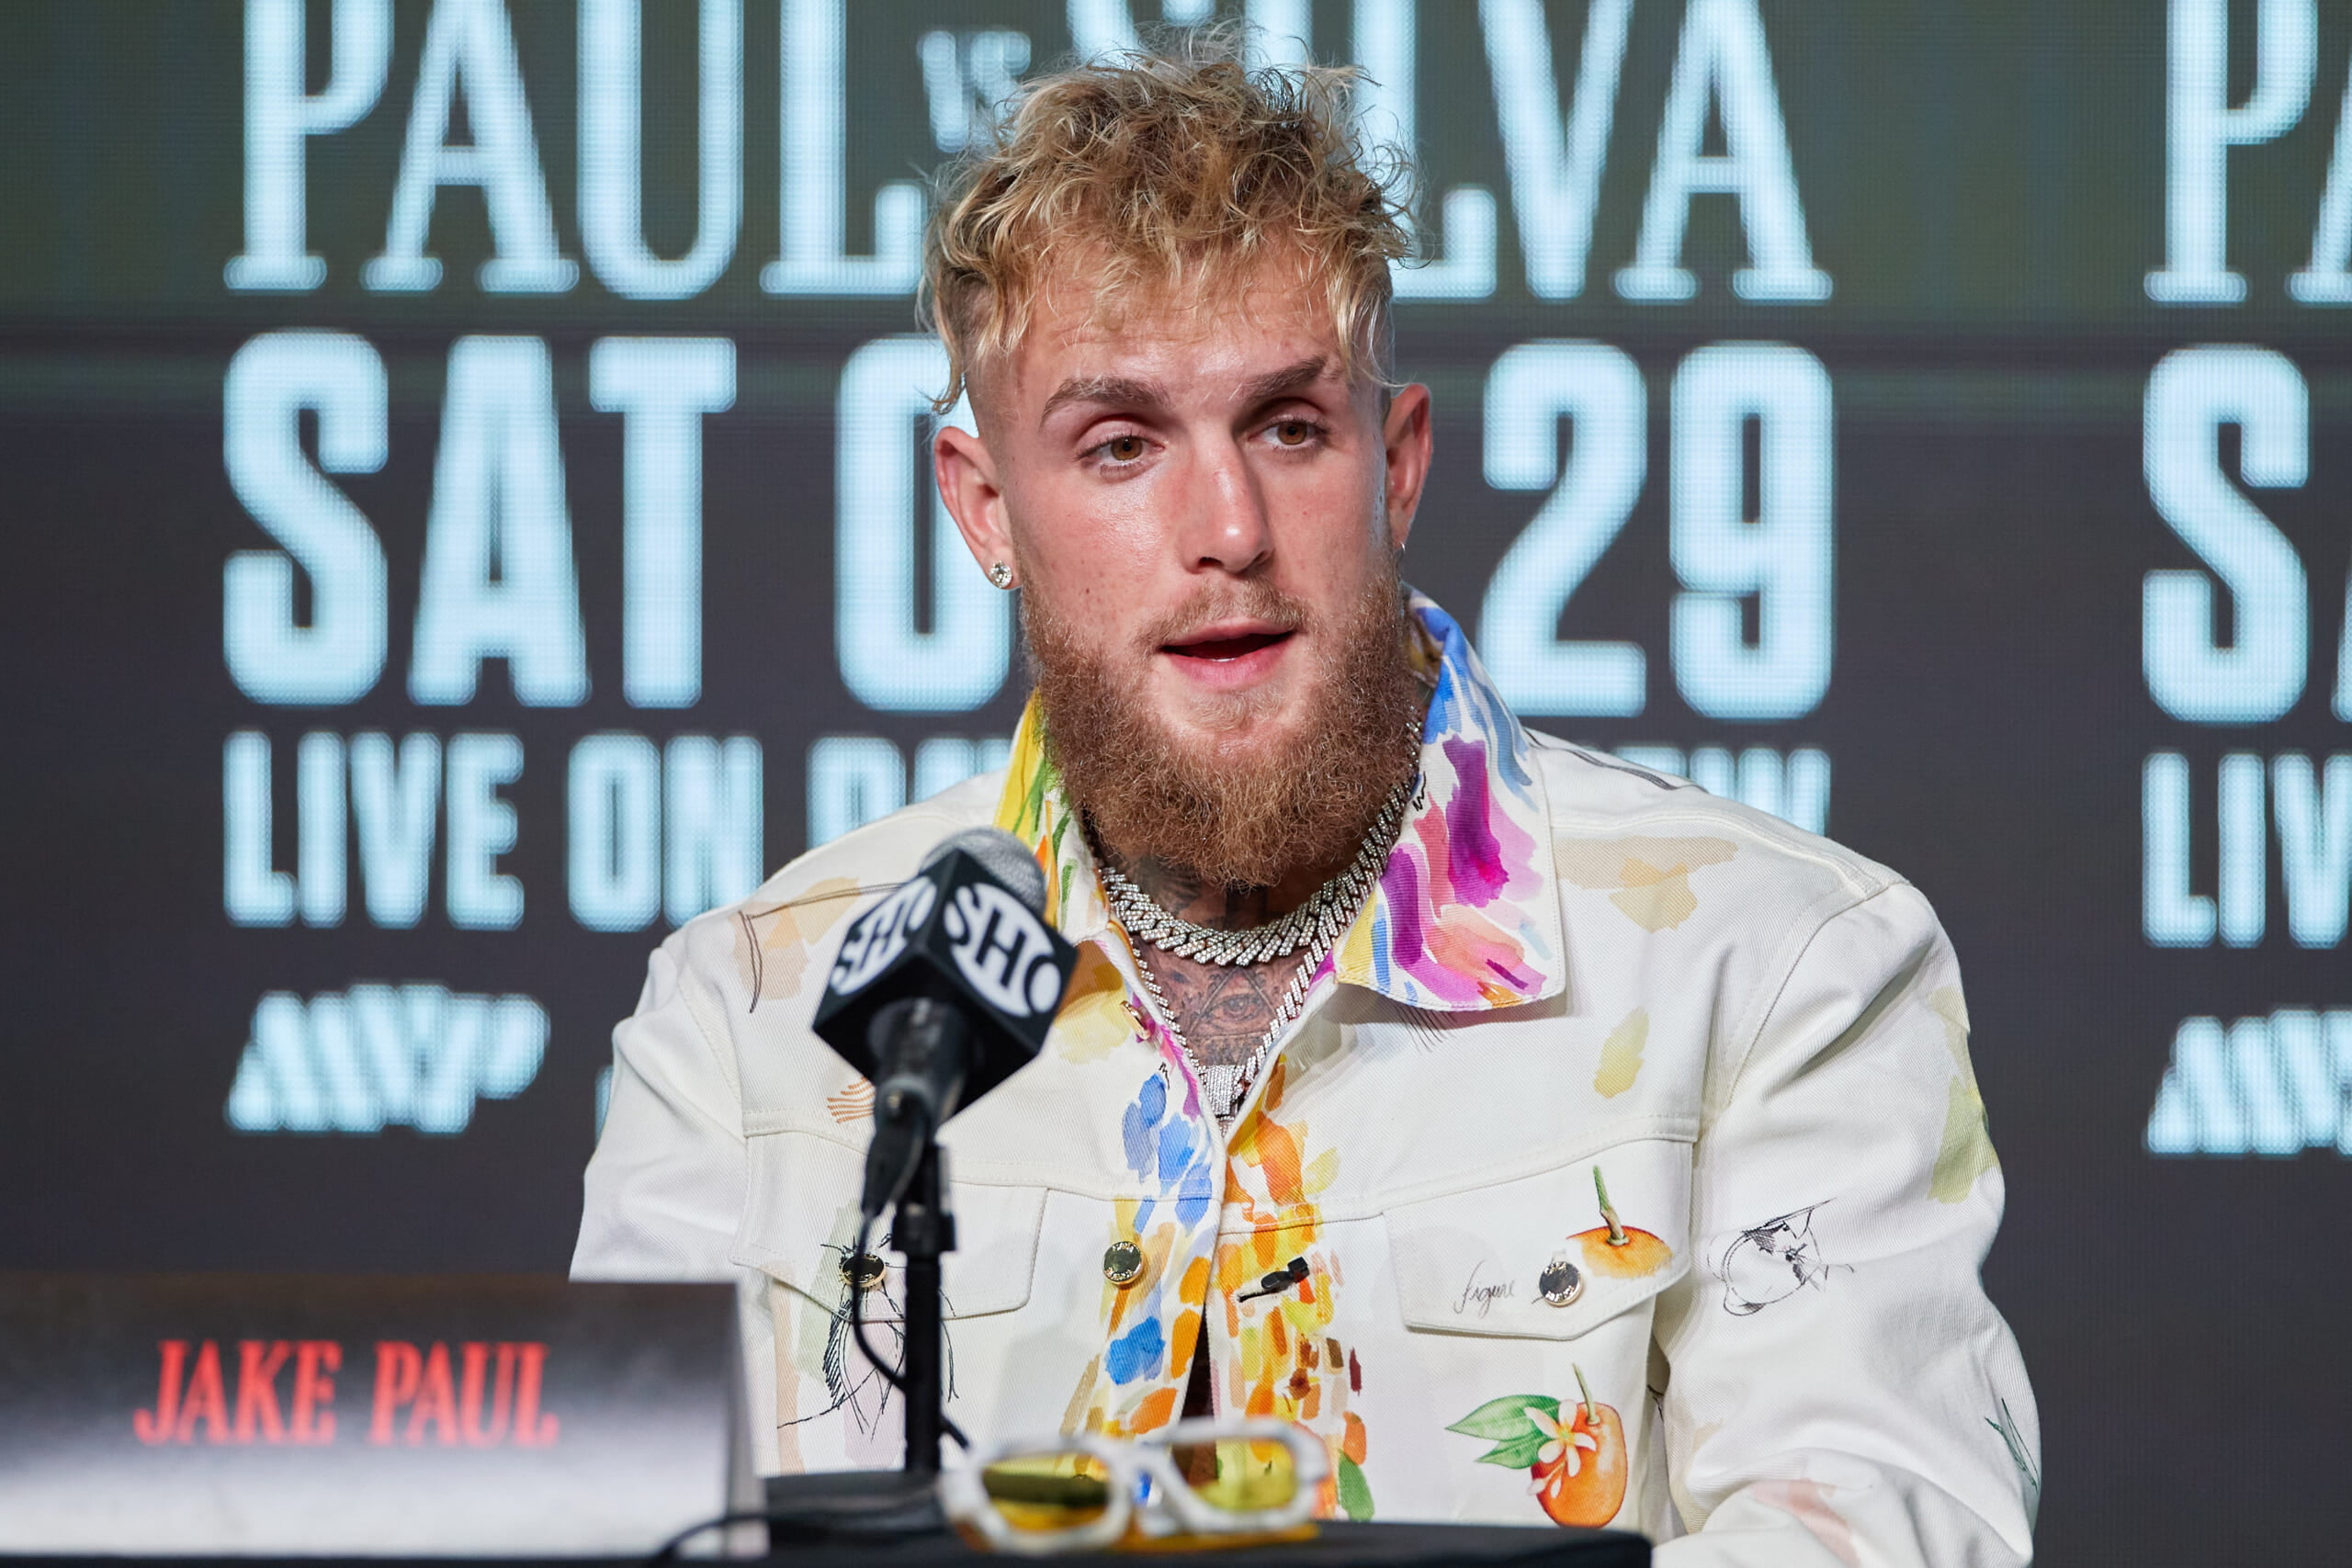 Jake Paul next fight: ‘Problem Child’ returns in August to face UFC legend Nate Diaz